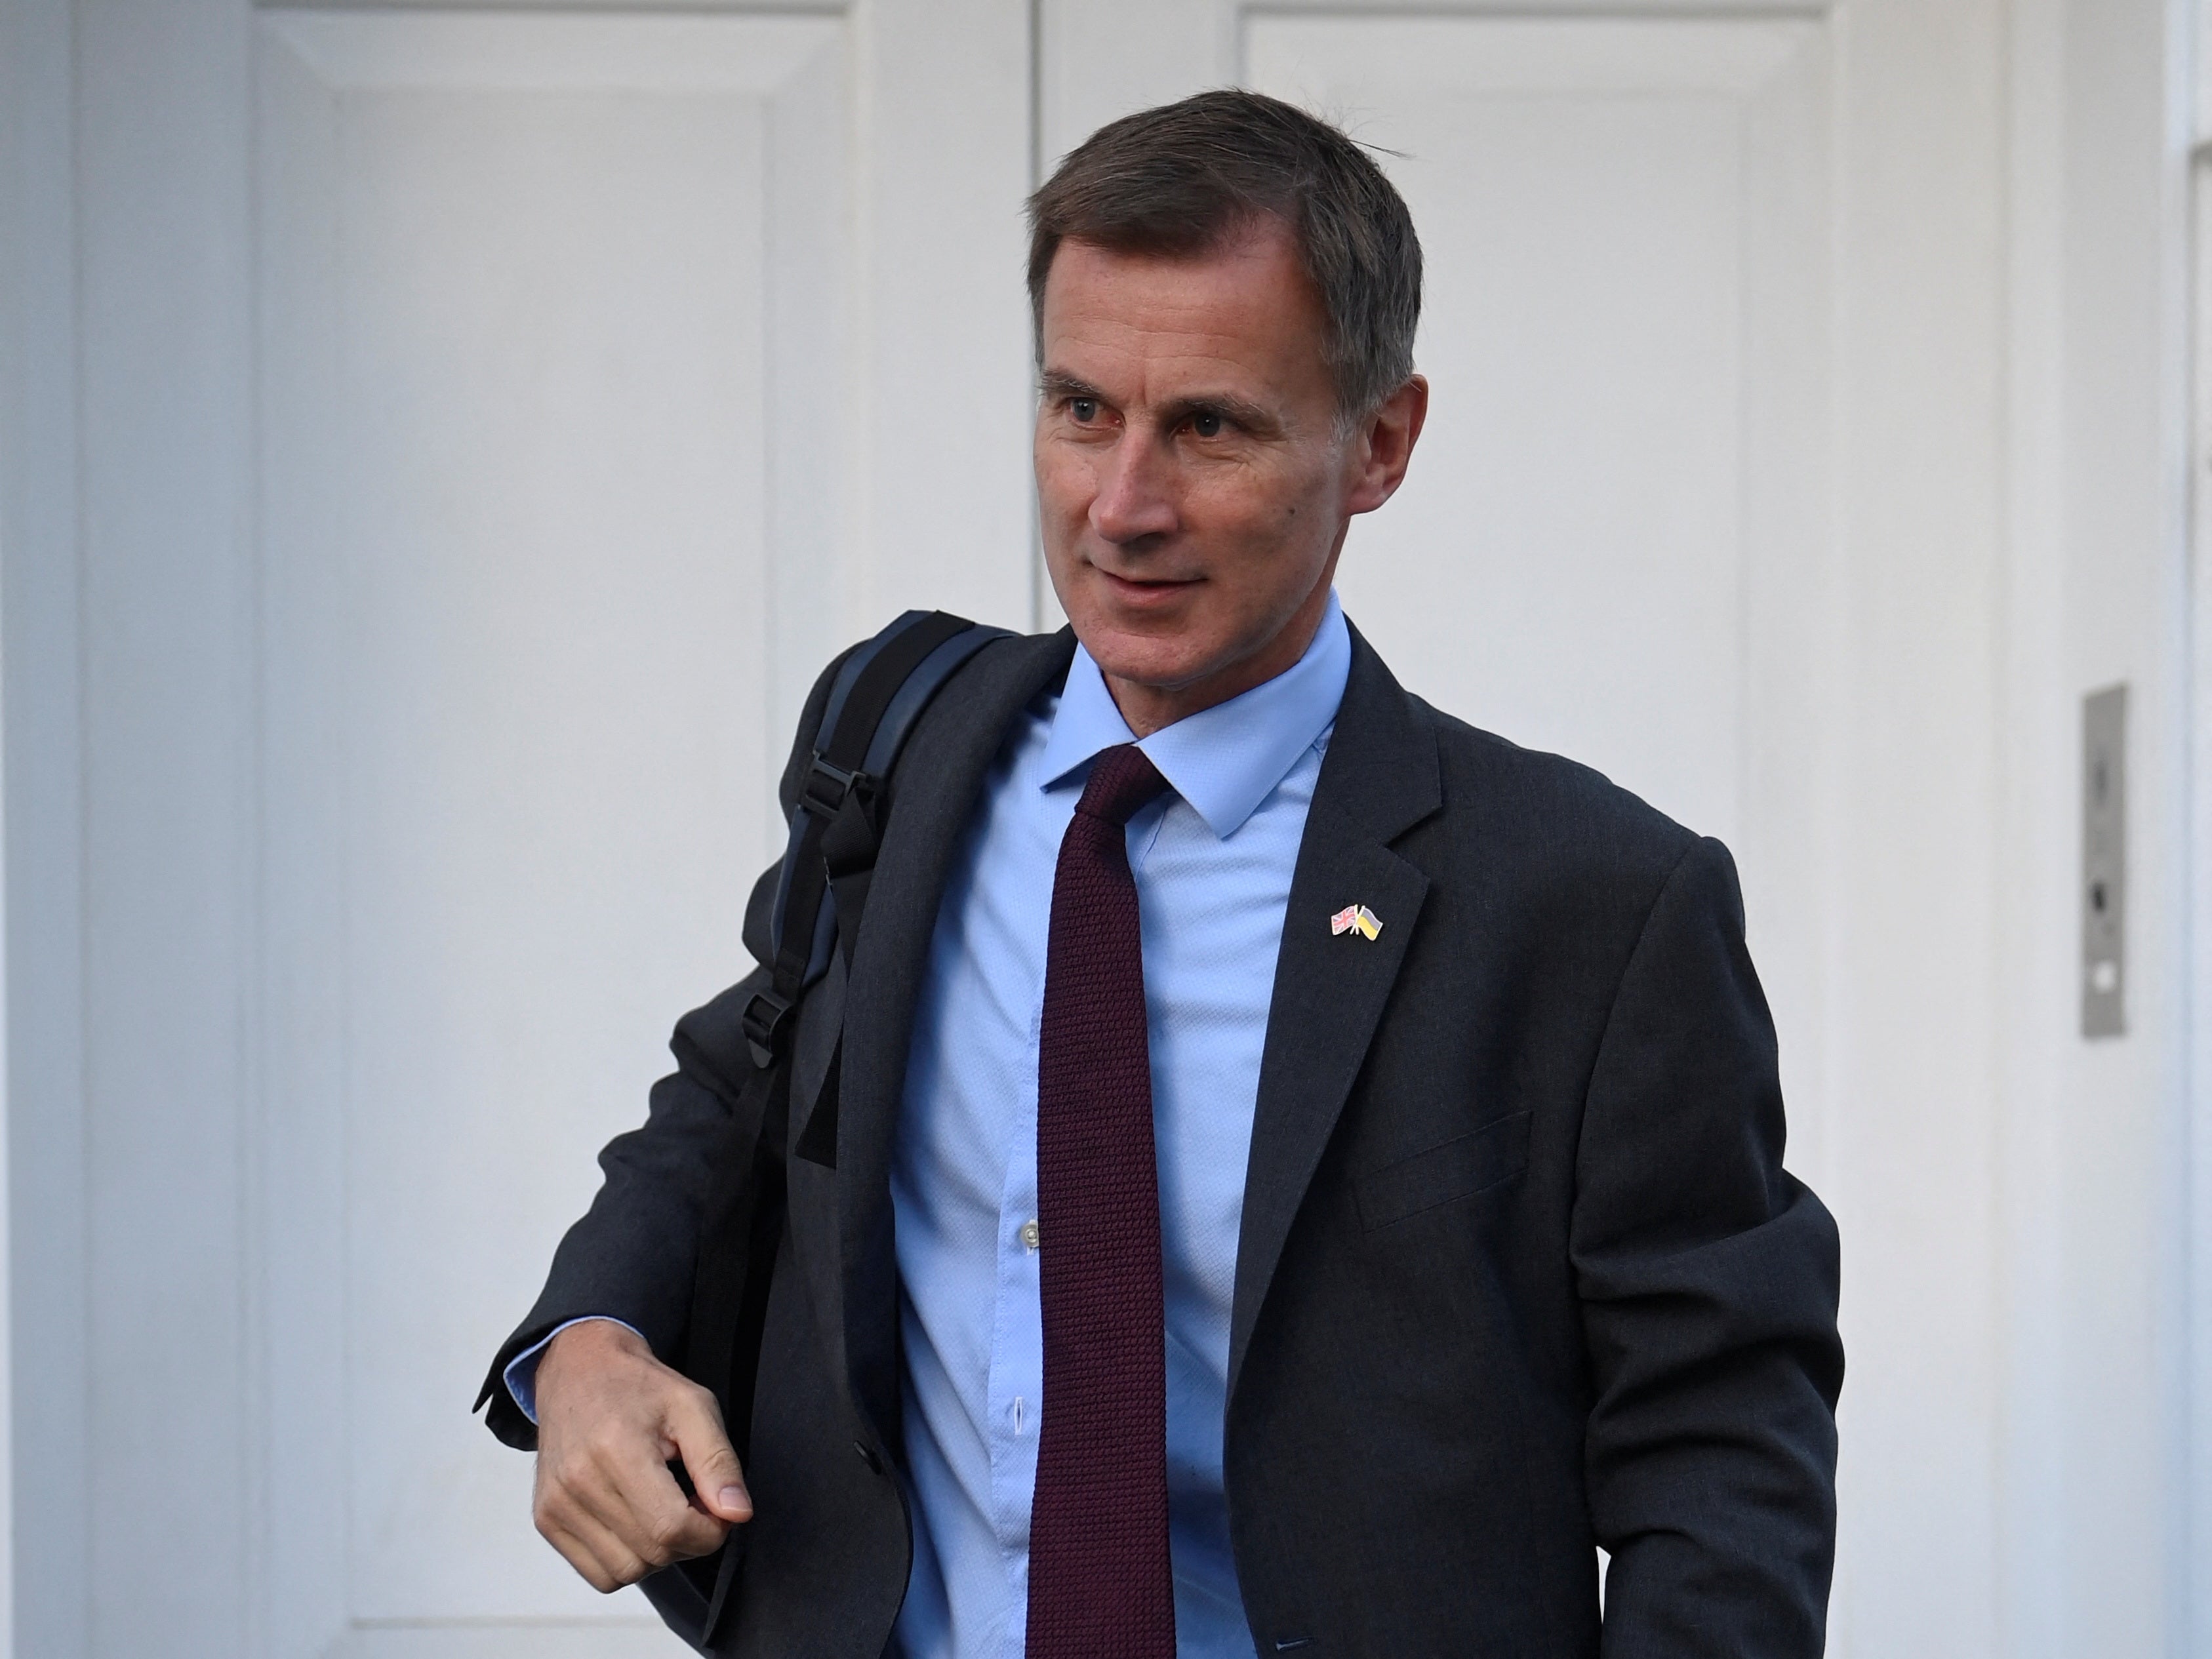 Critics say Hunt has yet to indicate he will be a green chancellor